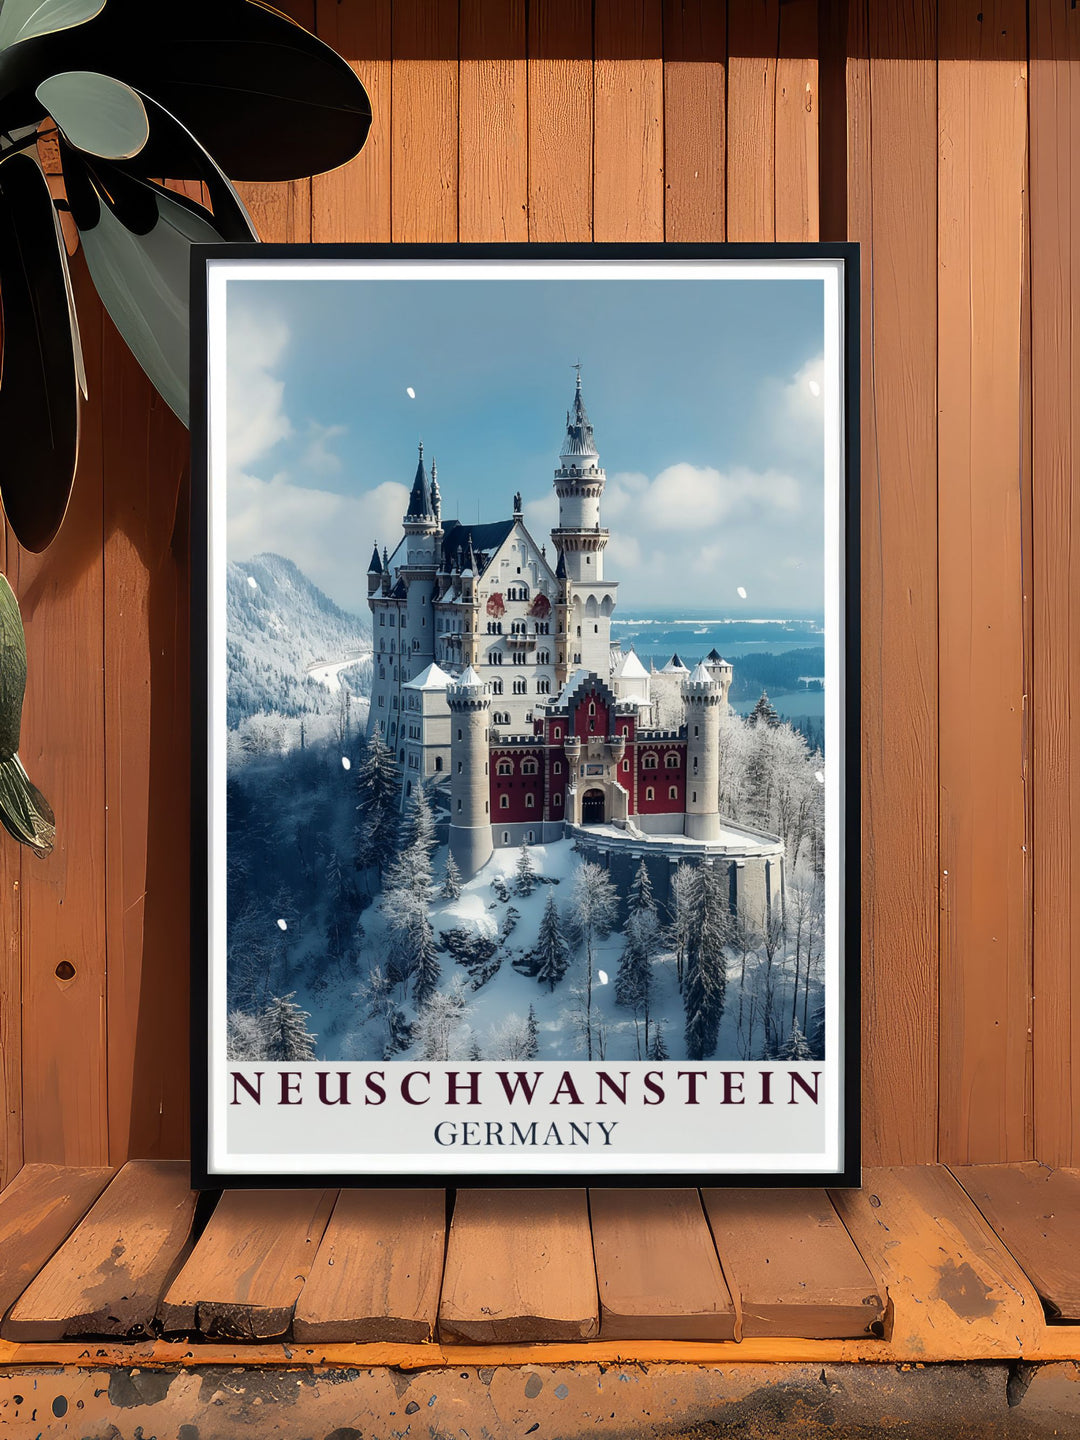 Elegant Neuschwanstein Castle poster perfect for enhancing home decor with its detailed fine line print. This art piece captures the castles beauty and charm.